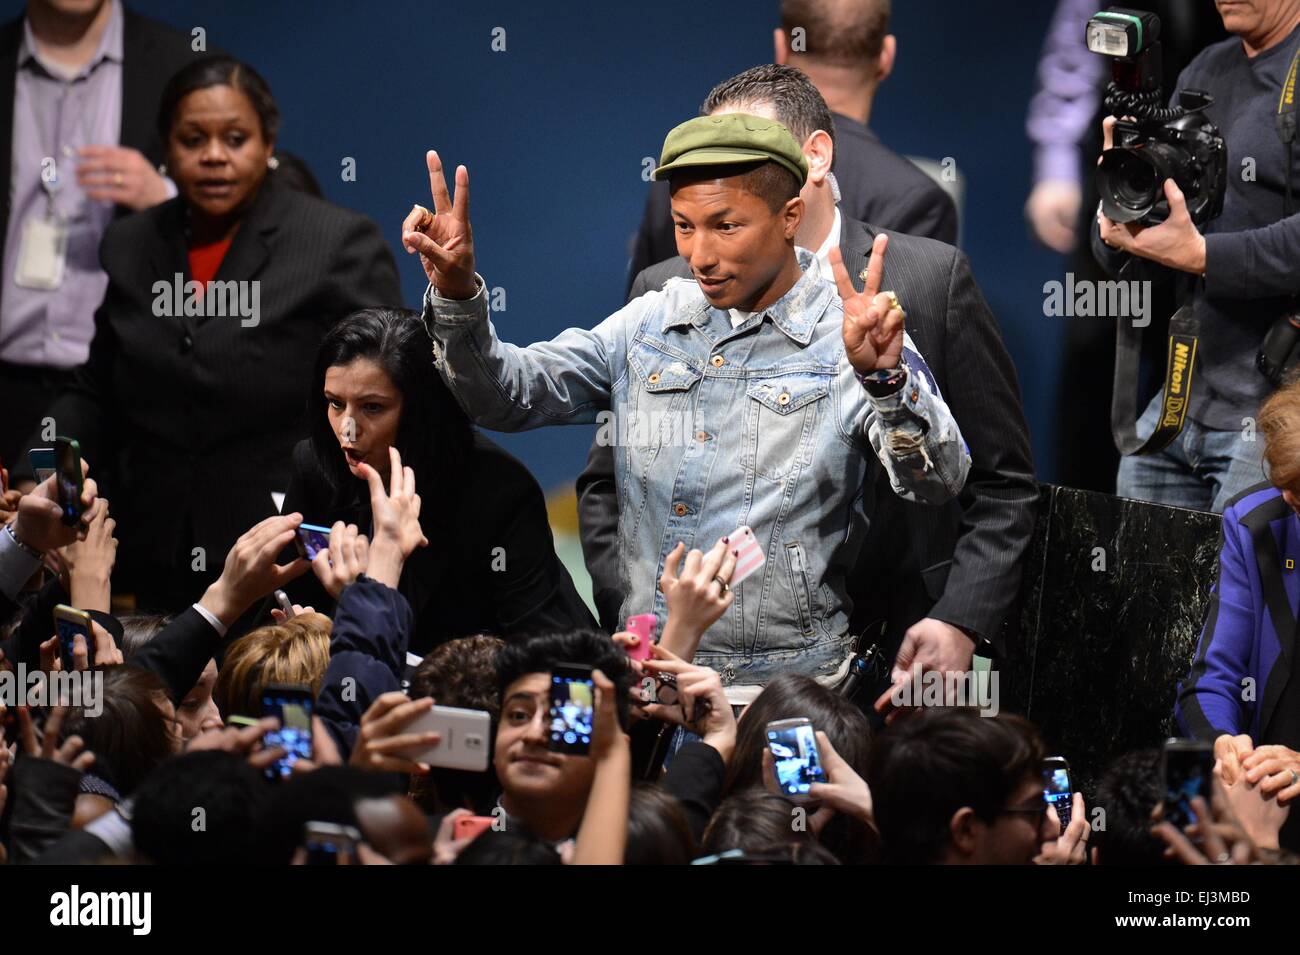 New York, USA. 20th Mar, 2015. Singer Pharrell Williams poses to fans during an event marking the International Day of Happiness at the UN headquarters in New York, on March 20, 2015. Grammy-winning singer Pharrell Williams joined the United Nations to celebrate the International Day of Happiness on Friday, with an emphasis on reaching out to young people and move them to take action on climate change. Credit:  Niu Xiaolei/Xinhua/Alamy Live News Stock Photo